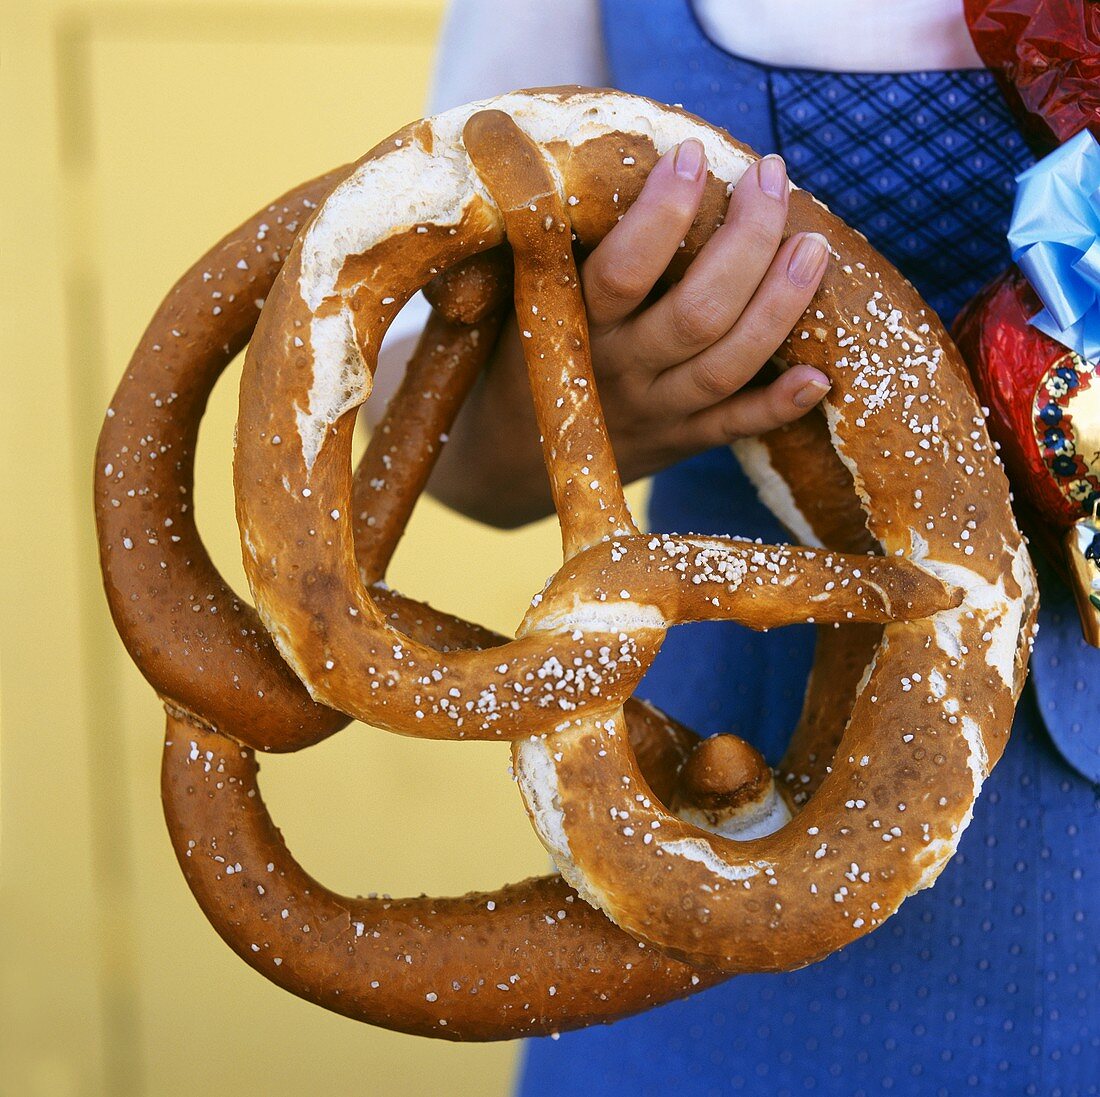 Woman holding two large pretzels in her hand